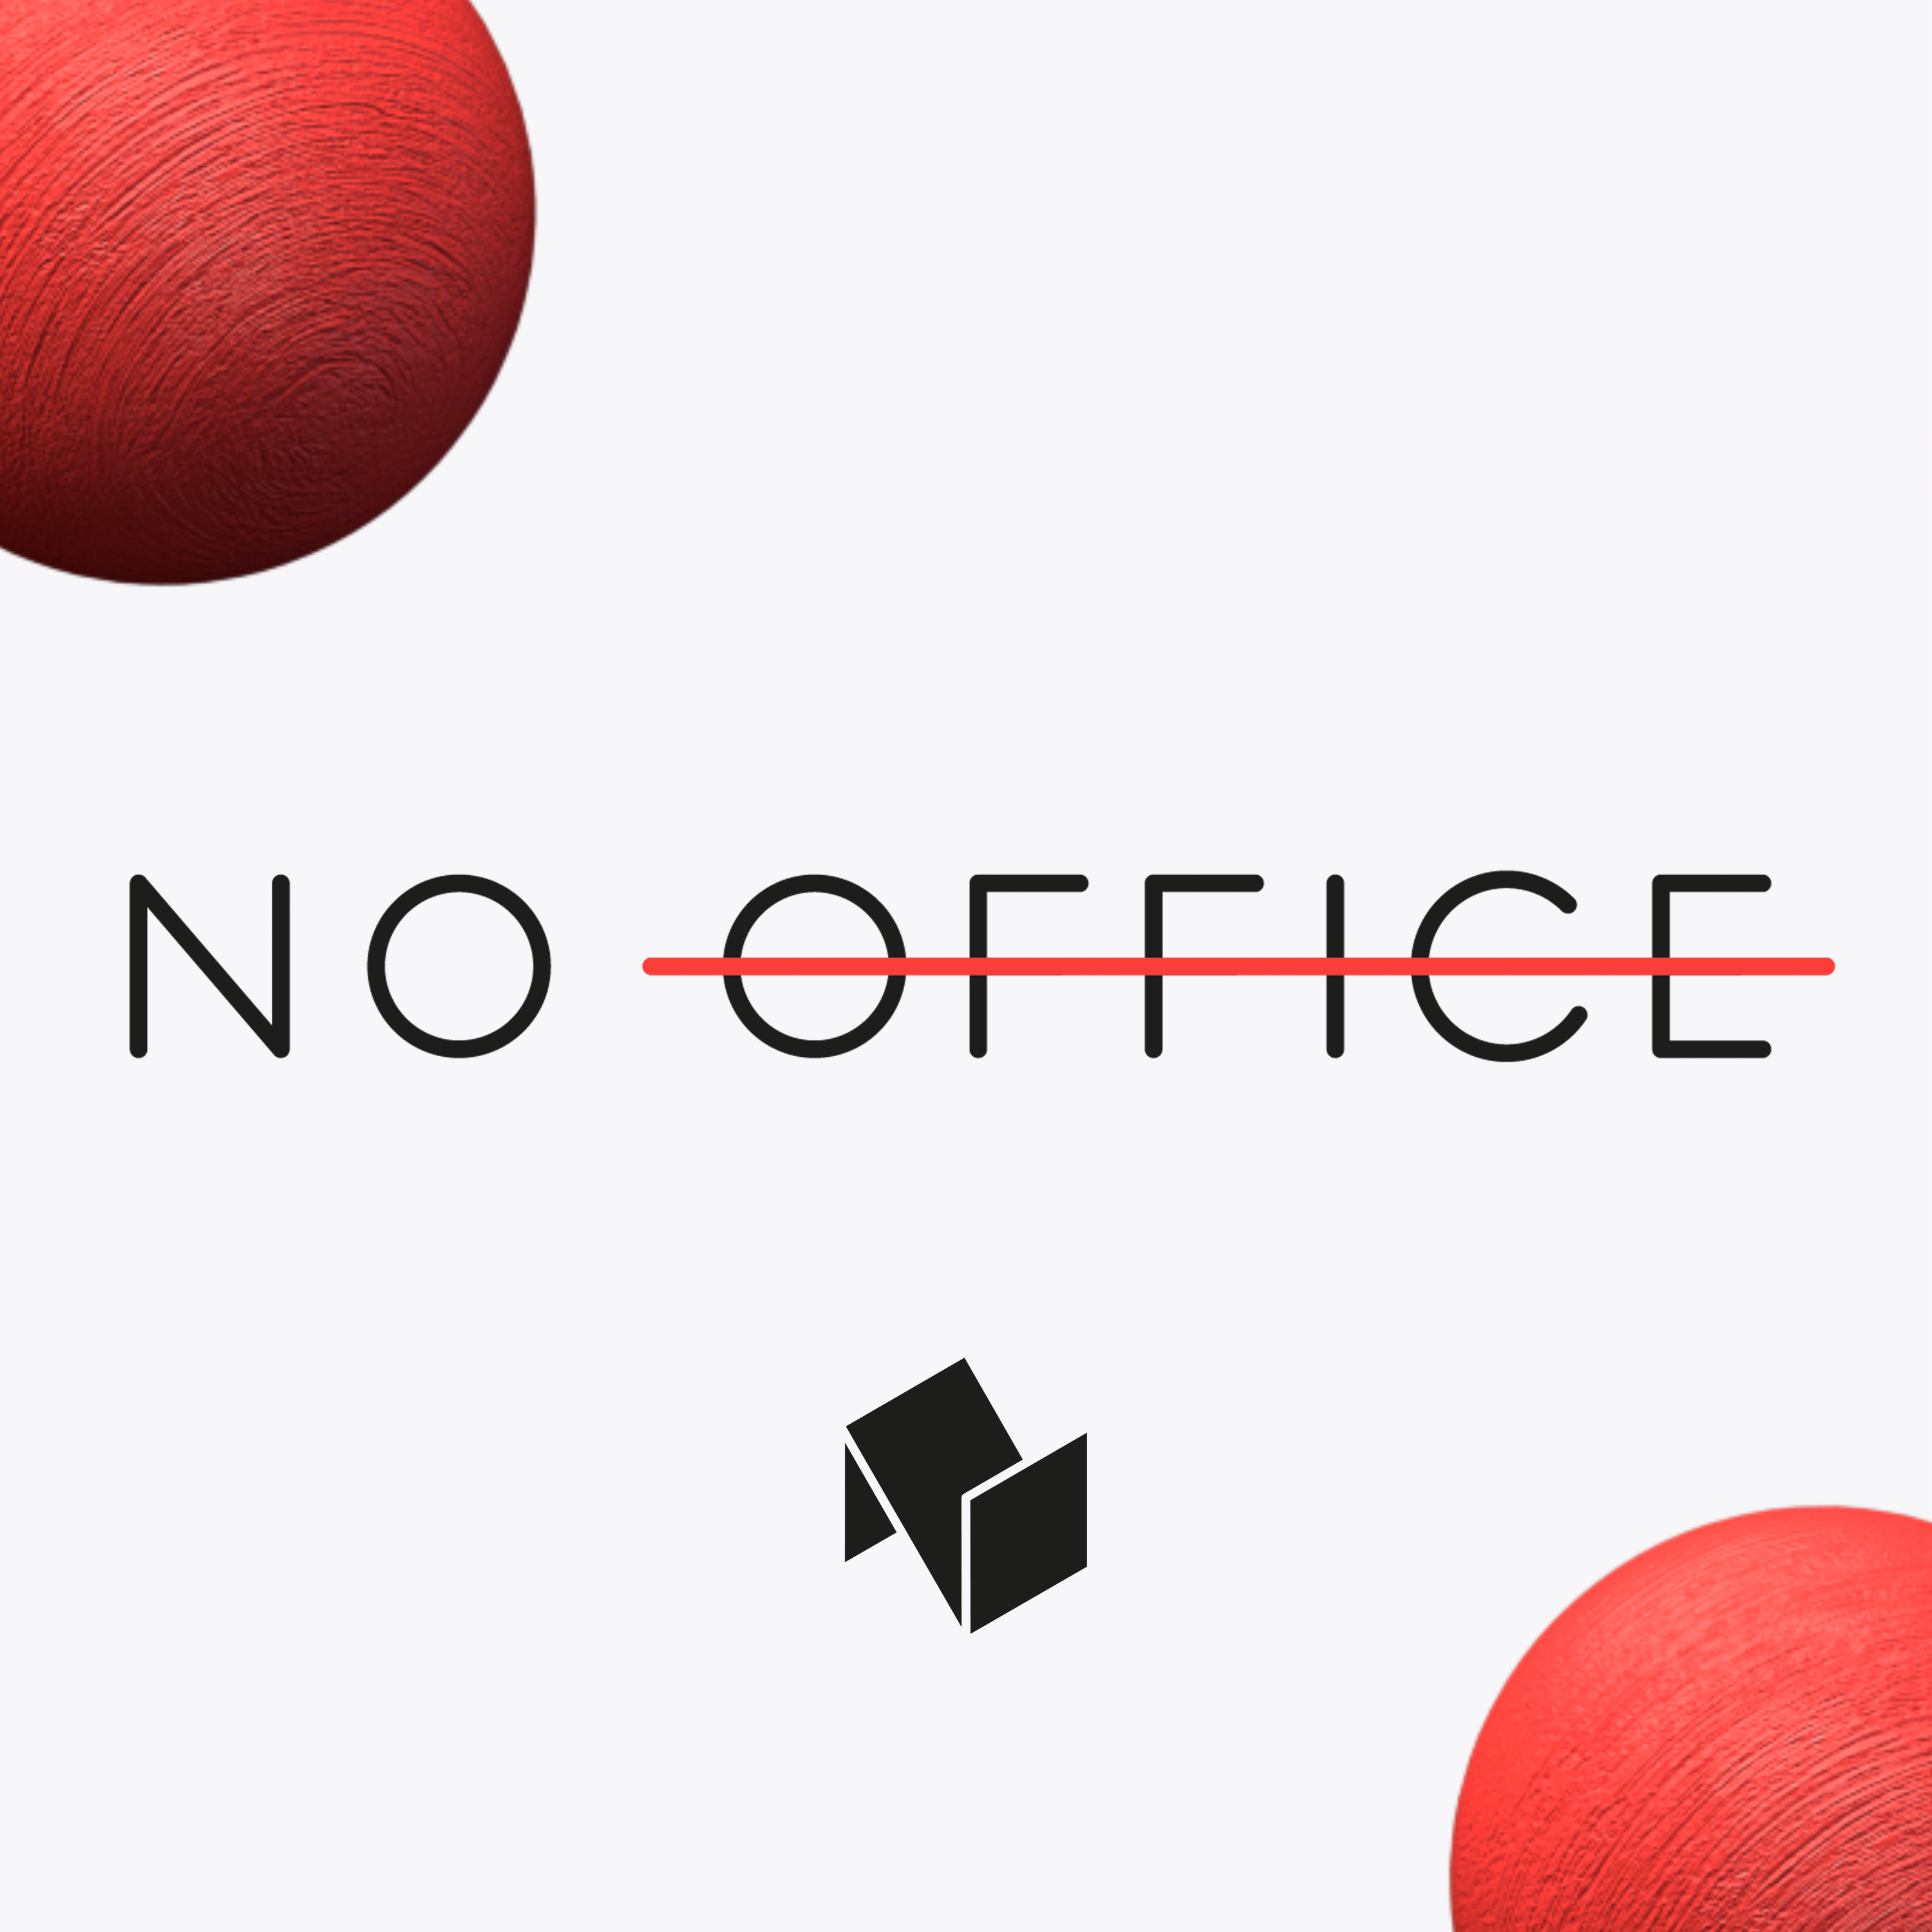 work and technology from the No Office company perspective